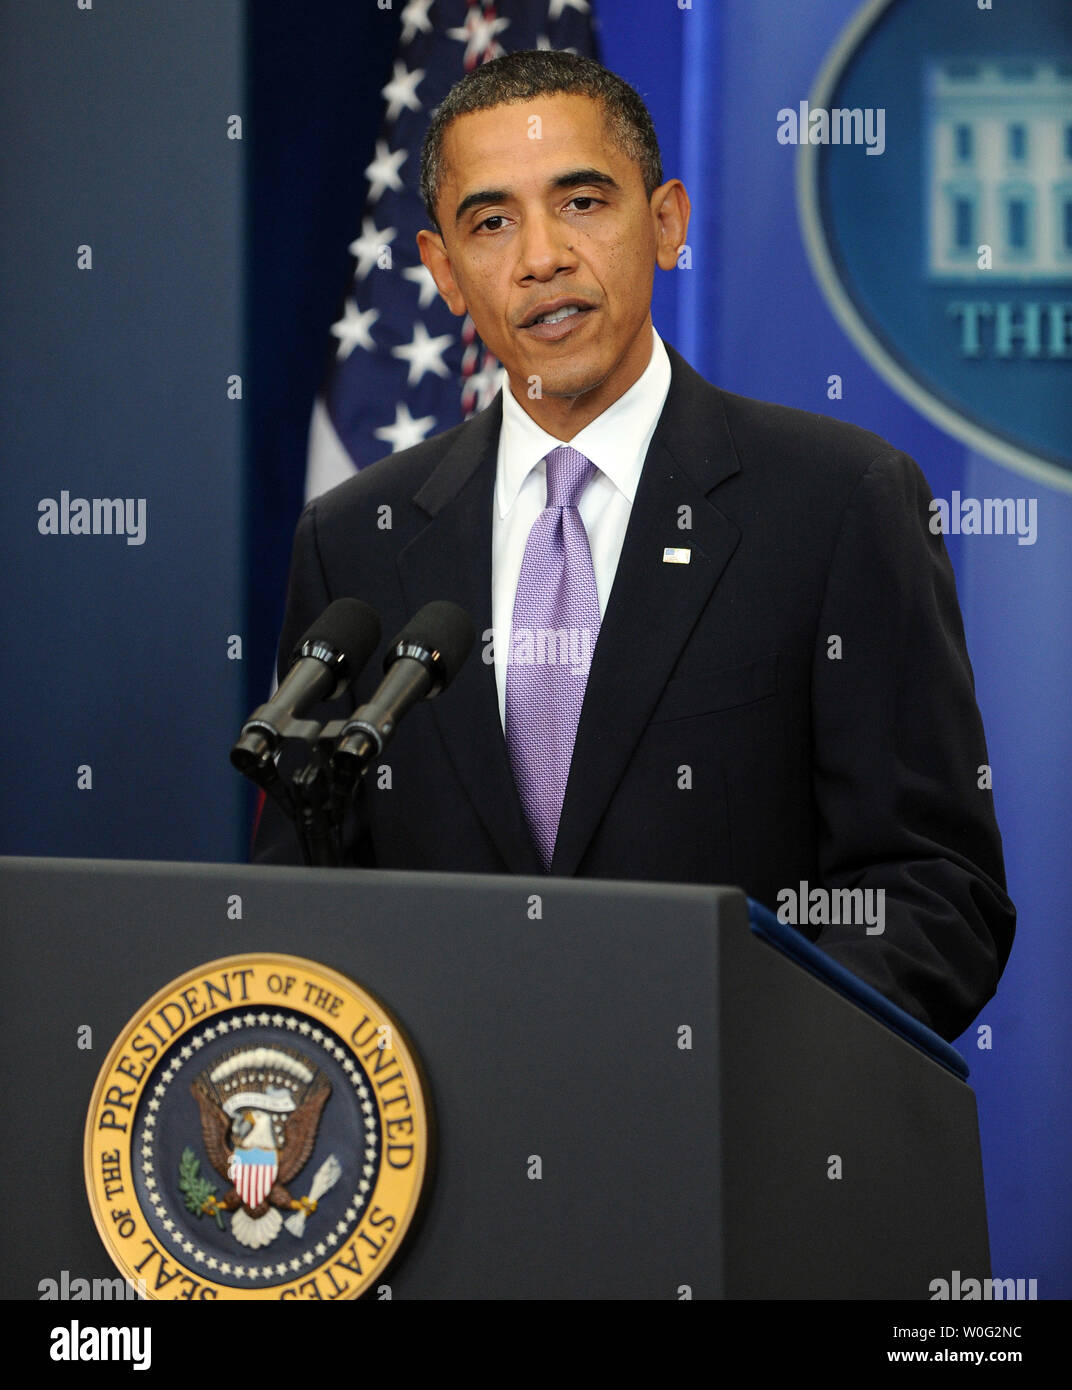 U.S. President Barack Obama makes a statement regarding bomb material found on cargo planes in the Brady Press Briefing Room of the White House in Washington on October 29, 2010.       UPI/Roger L. Wollenberg Stock Photo